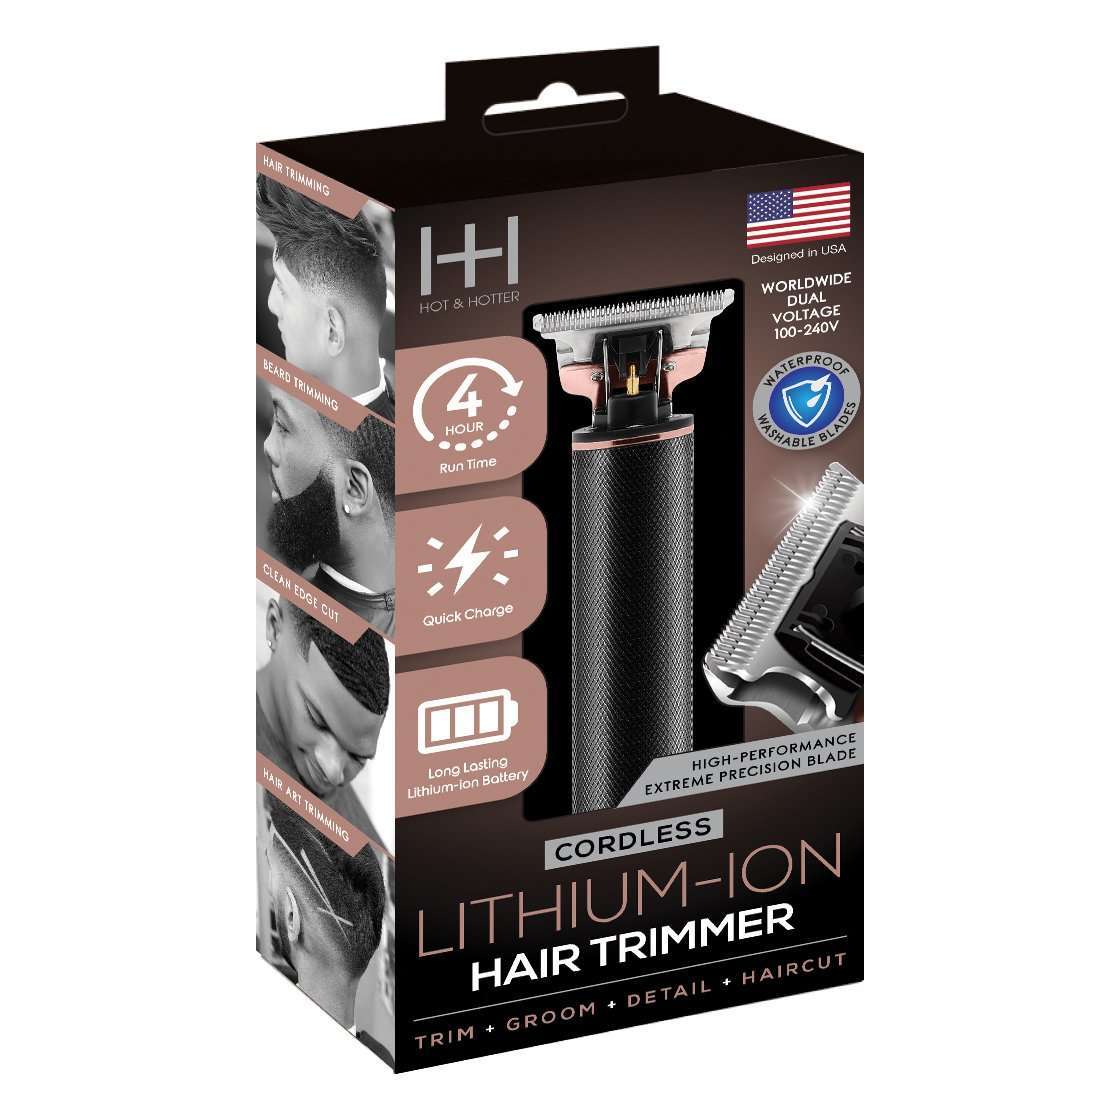 Hot & Hotter Cordless Lithium-Ion Hair Trimmer Black & Rose